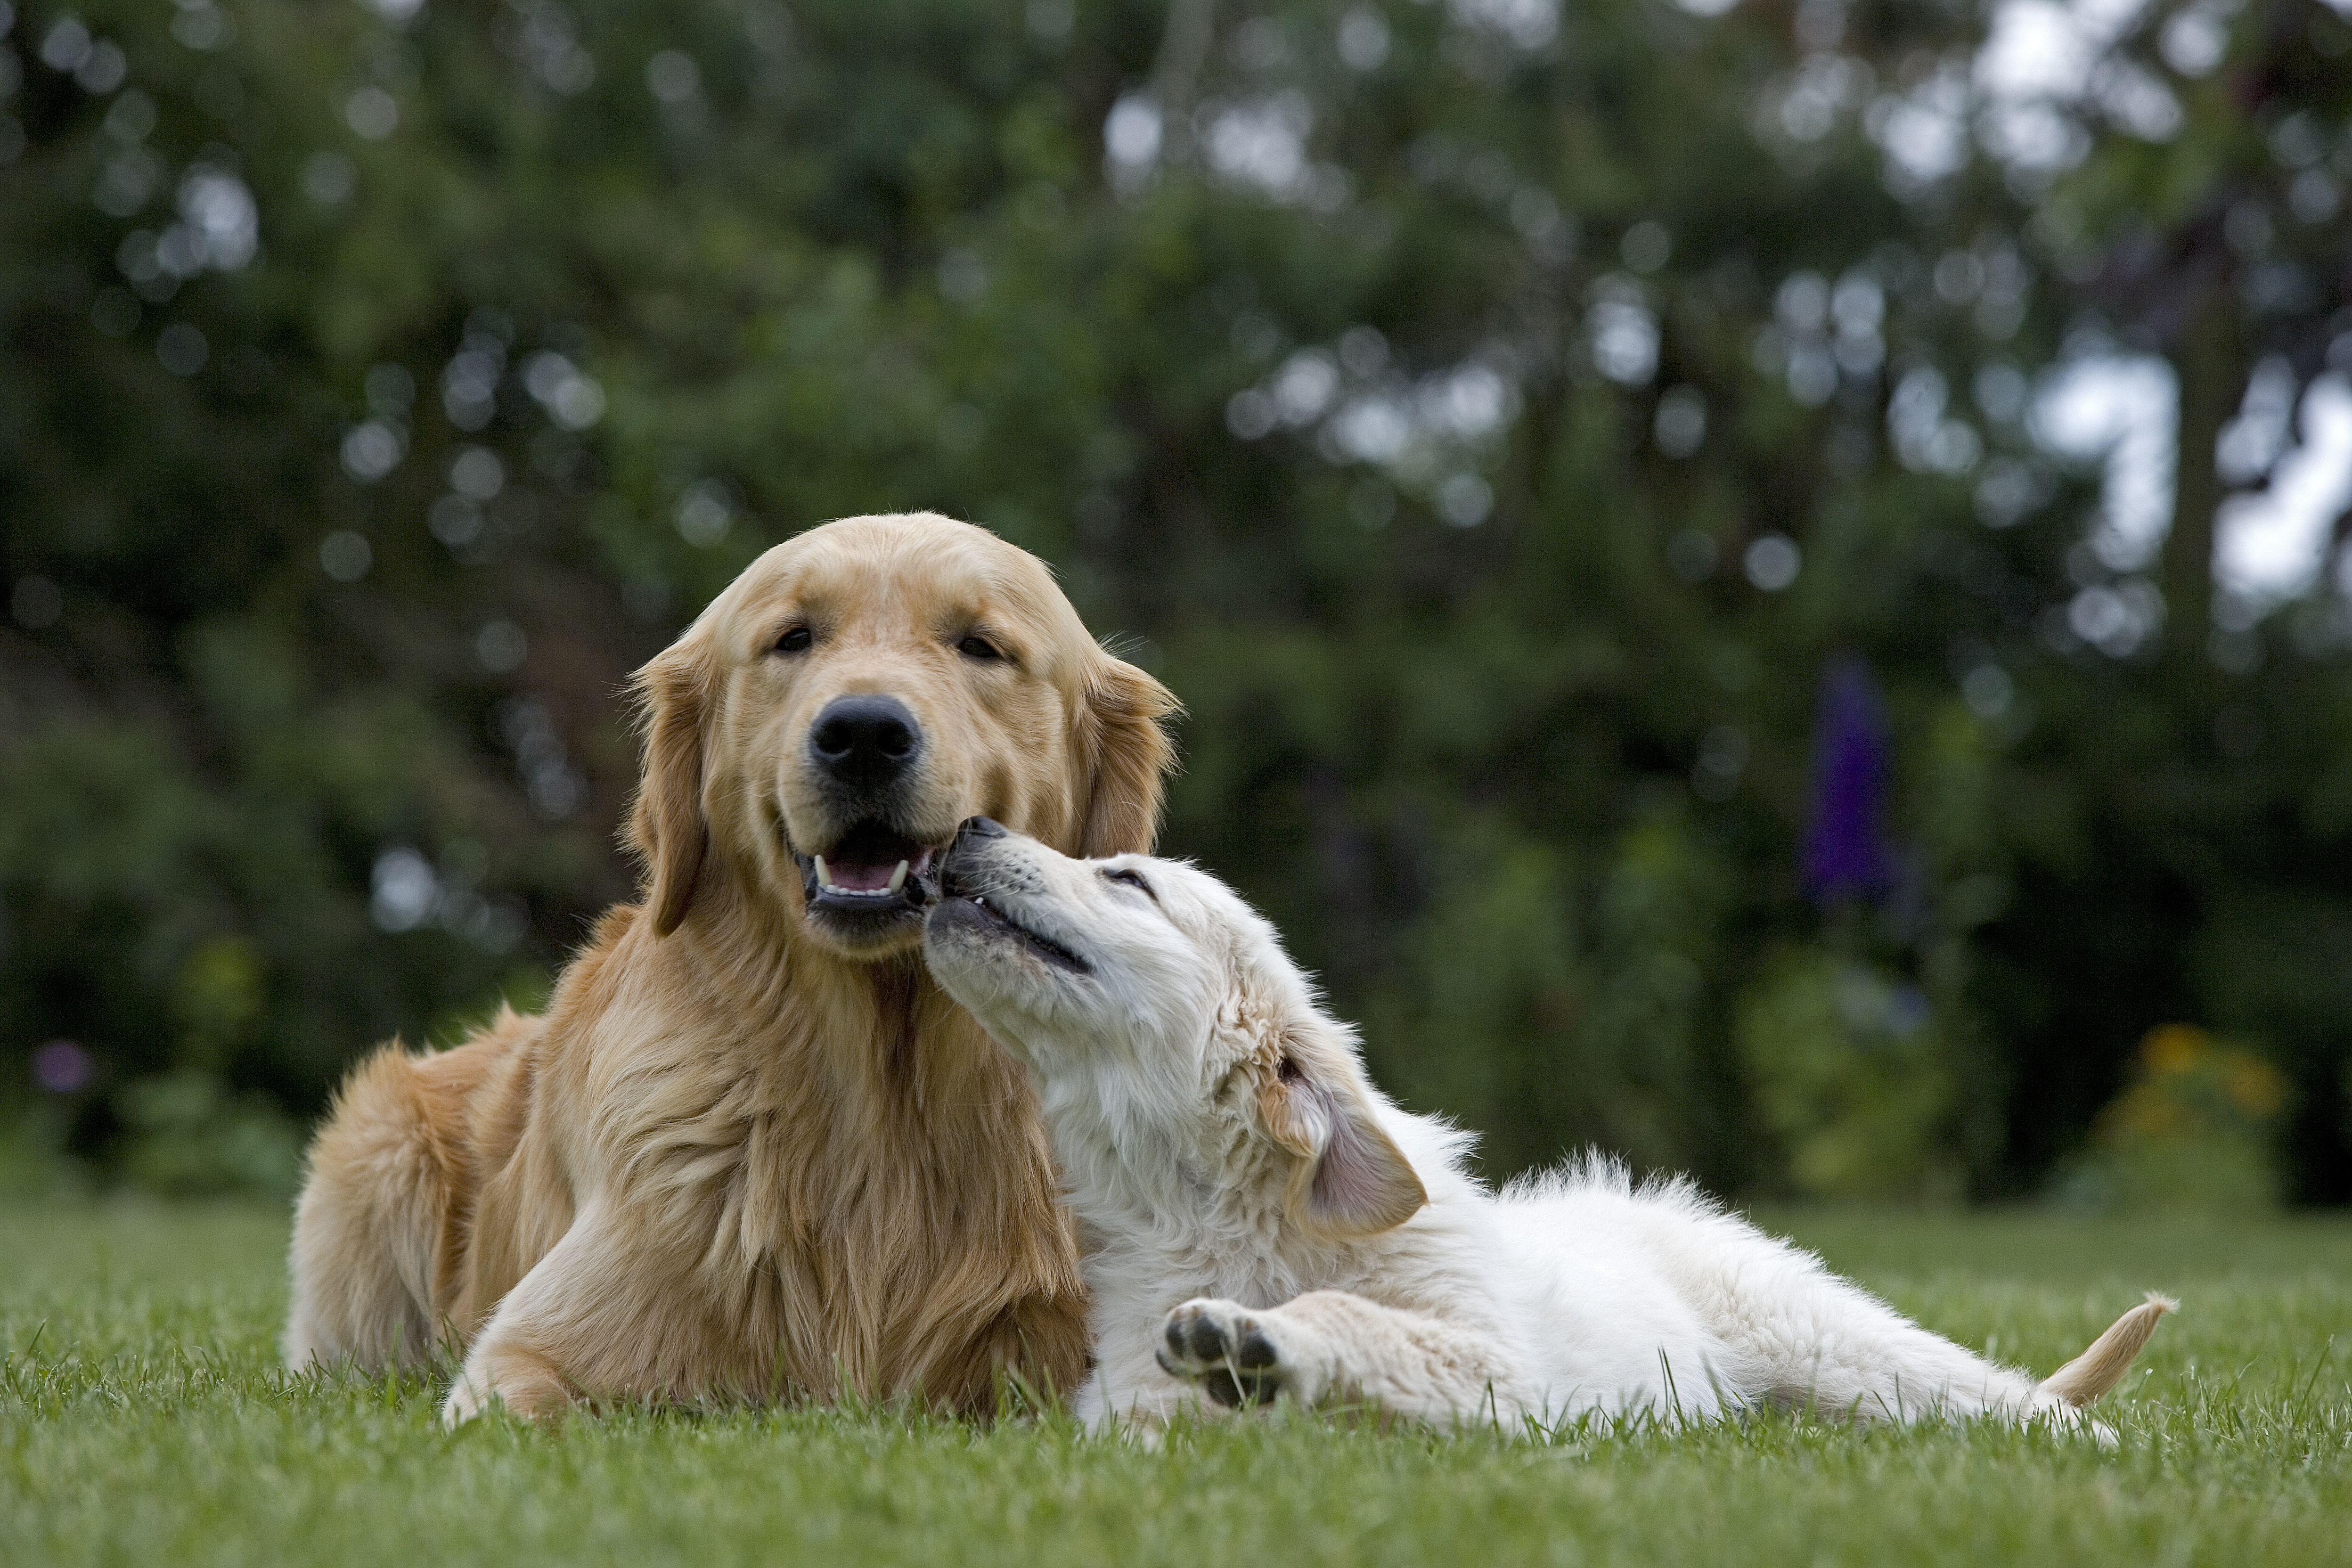 Puppy and adult Golden Retrievers lying down outdoors in grass